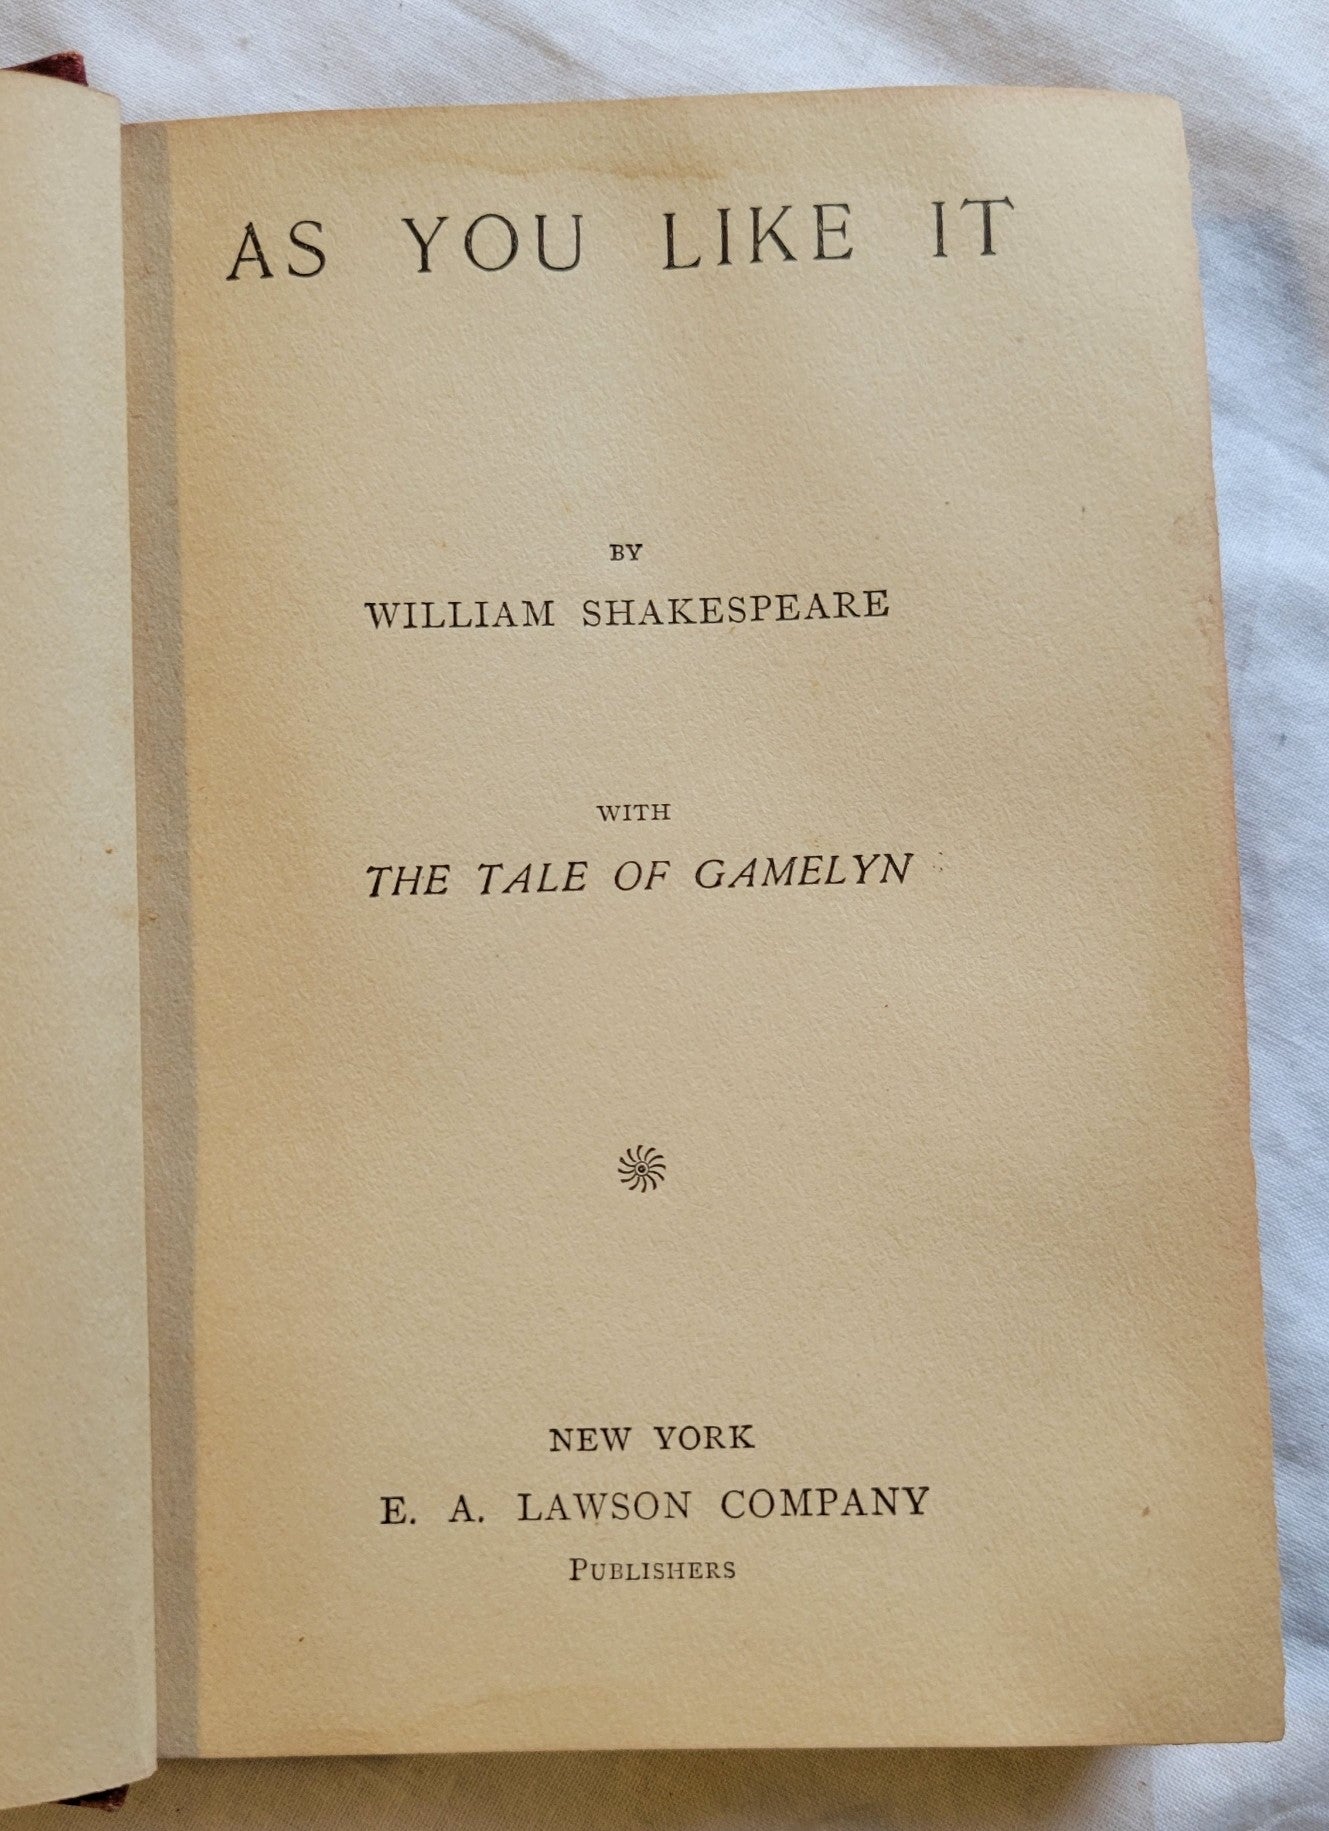 "As You Like It" by William Shakespeare, published by E. A. Lawson Company Publishers, printing date unknown but believed to be around the late 1800s.  View of inside title page.